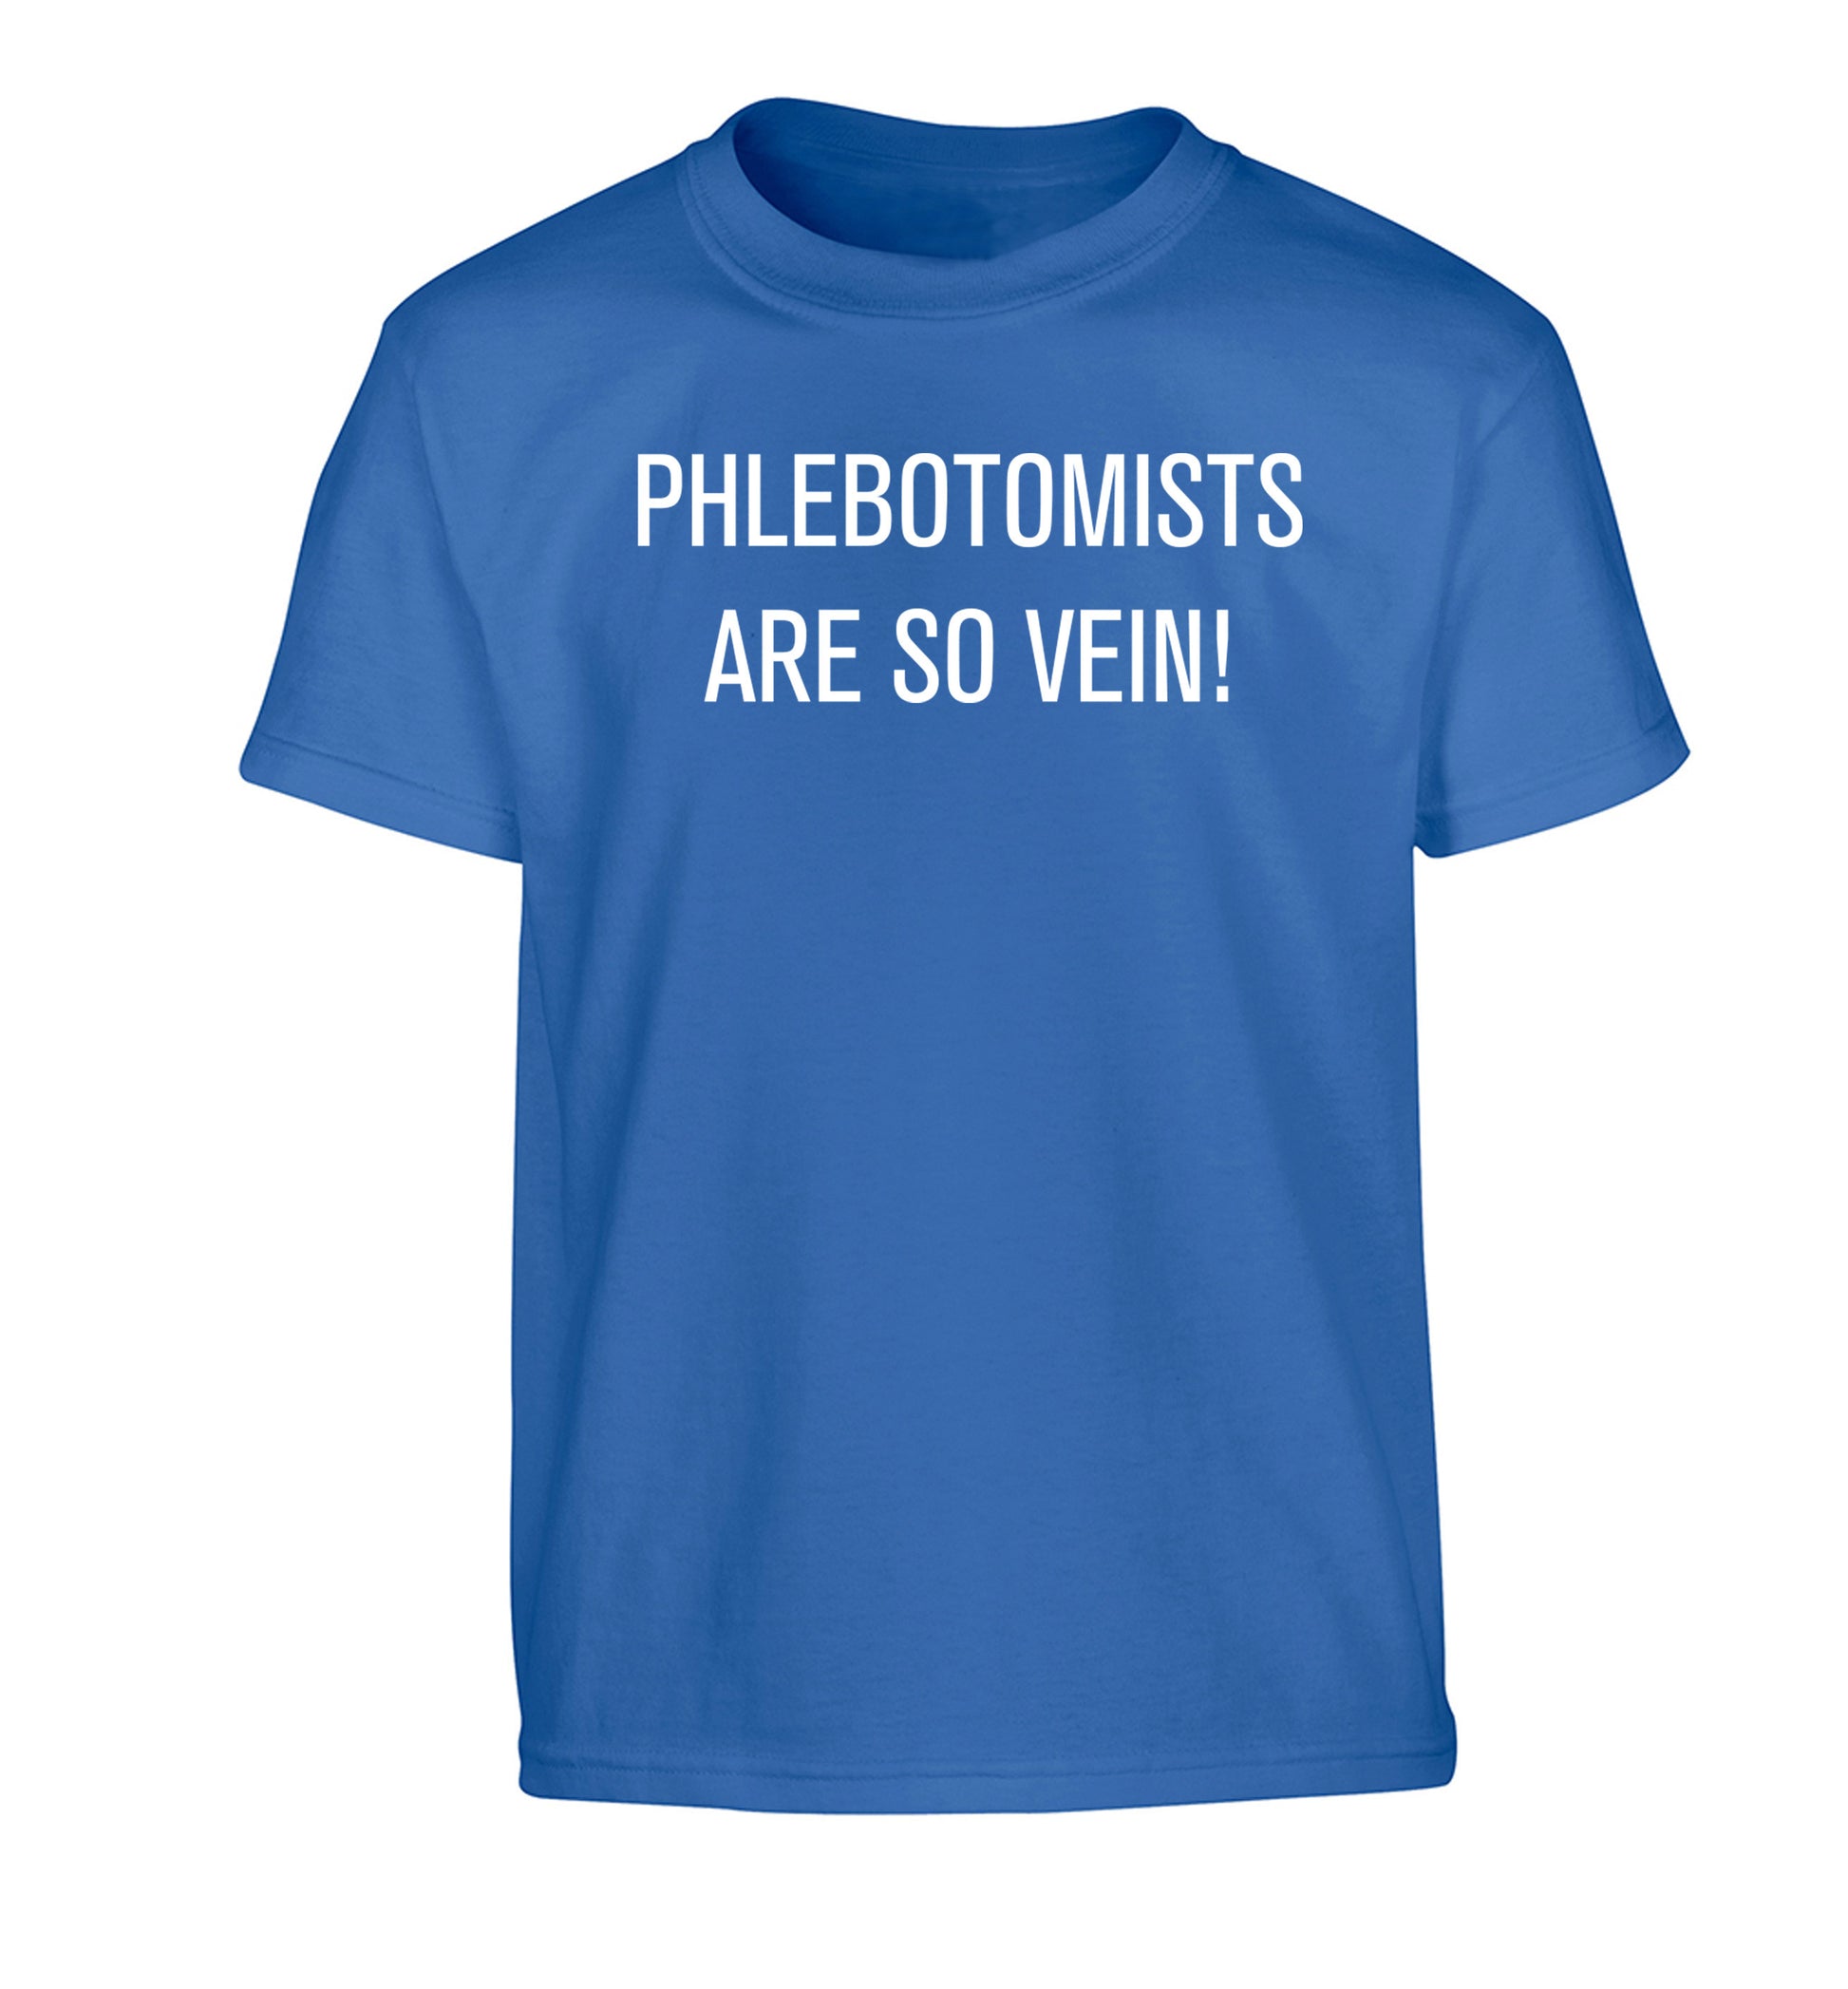 Phlebotomists are so vein! Children's blue Tshirt 12-14 Years